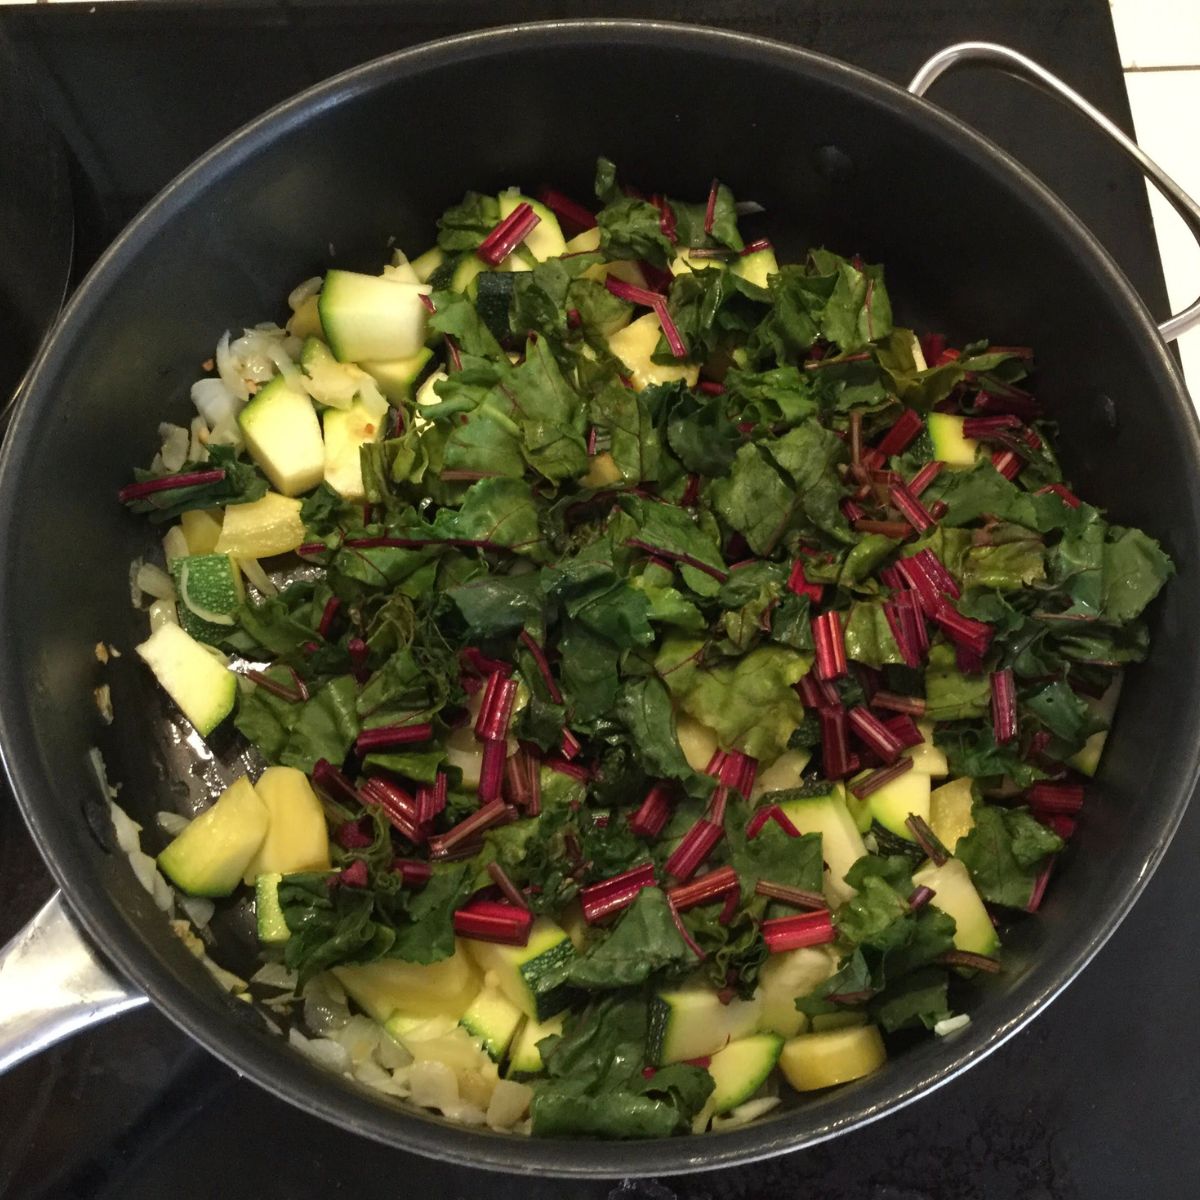 sauteed vegetables and beet greens in a frying pan